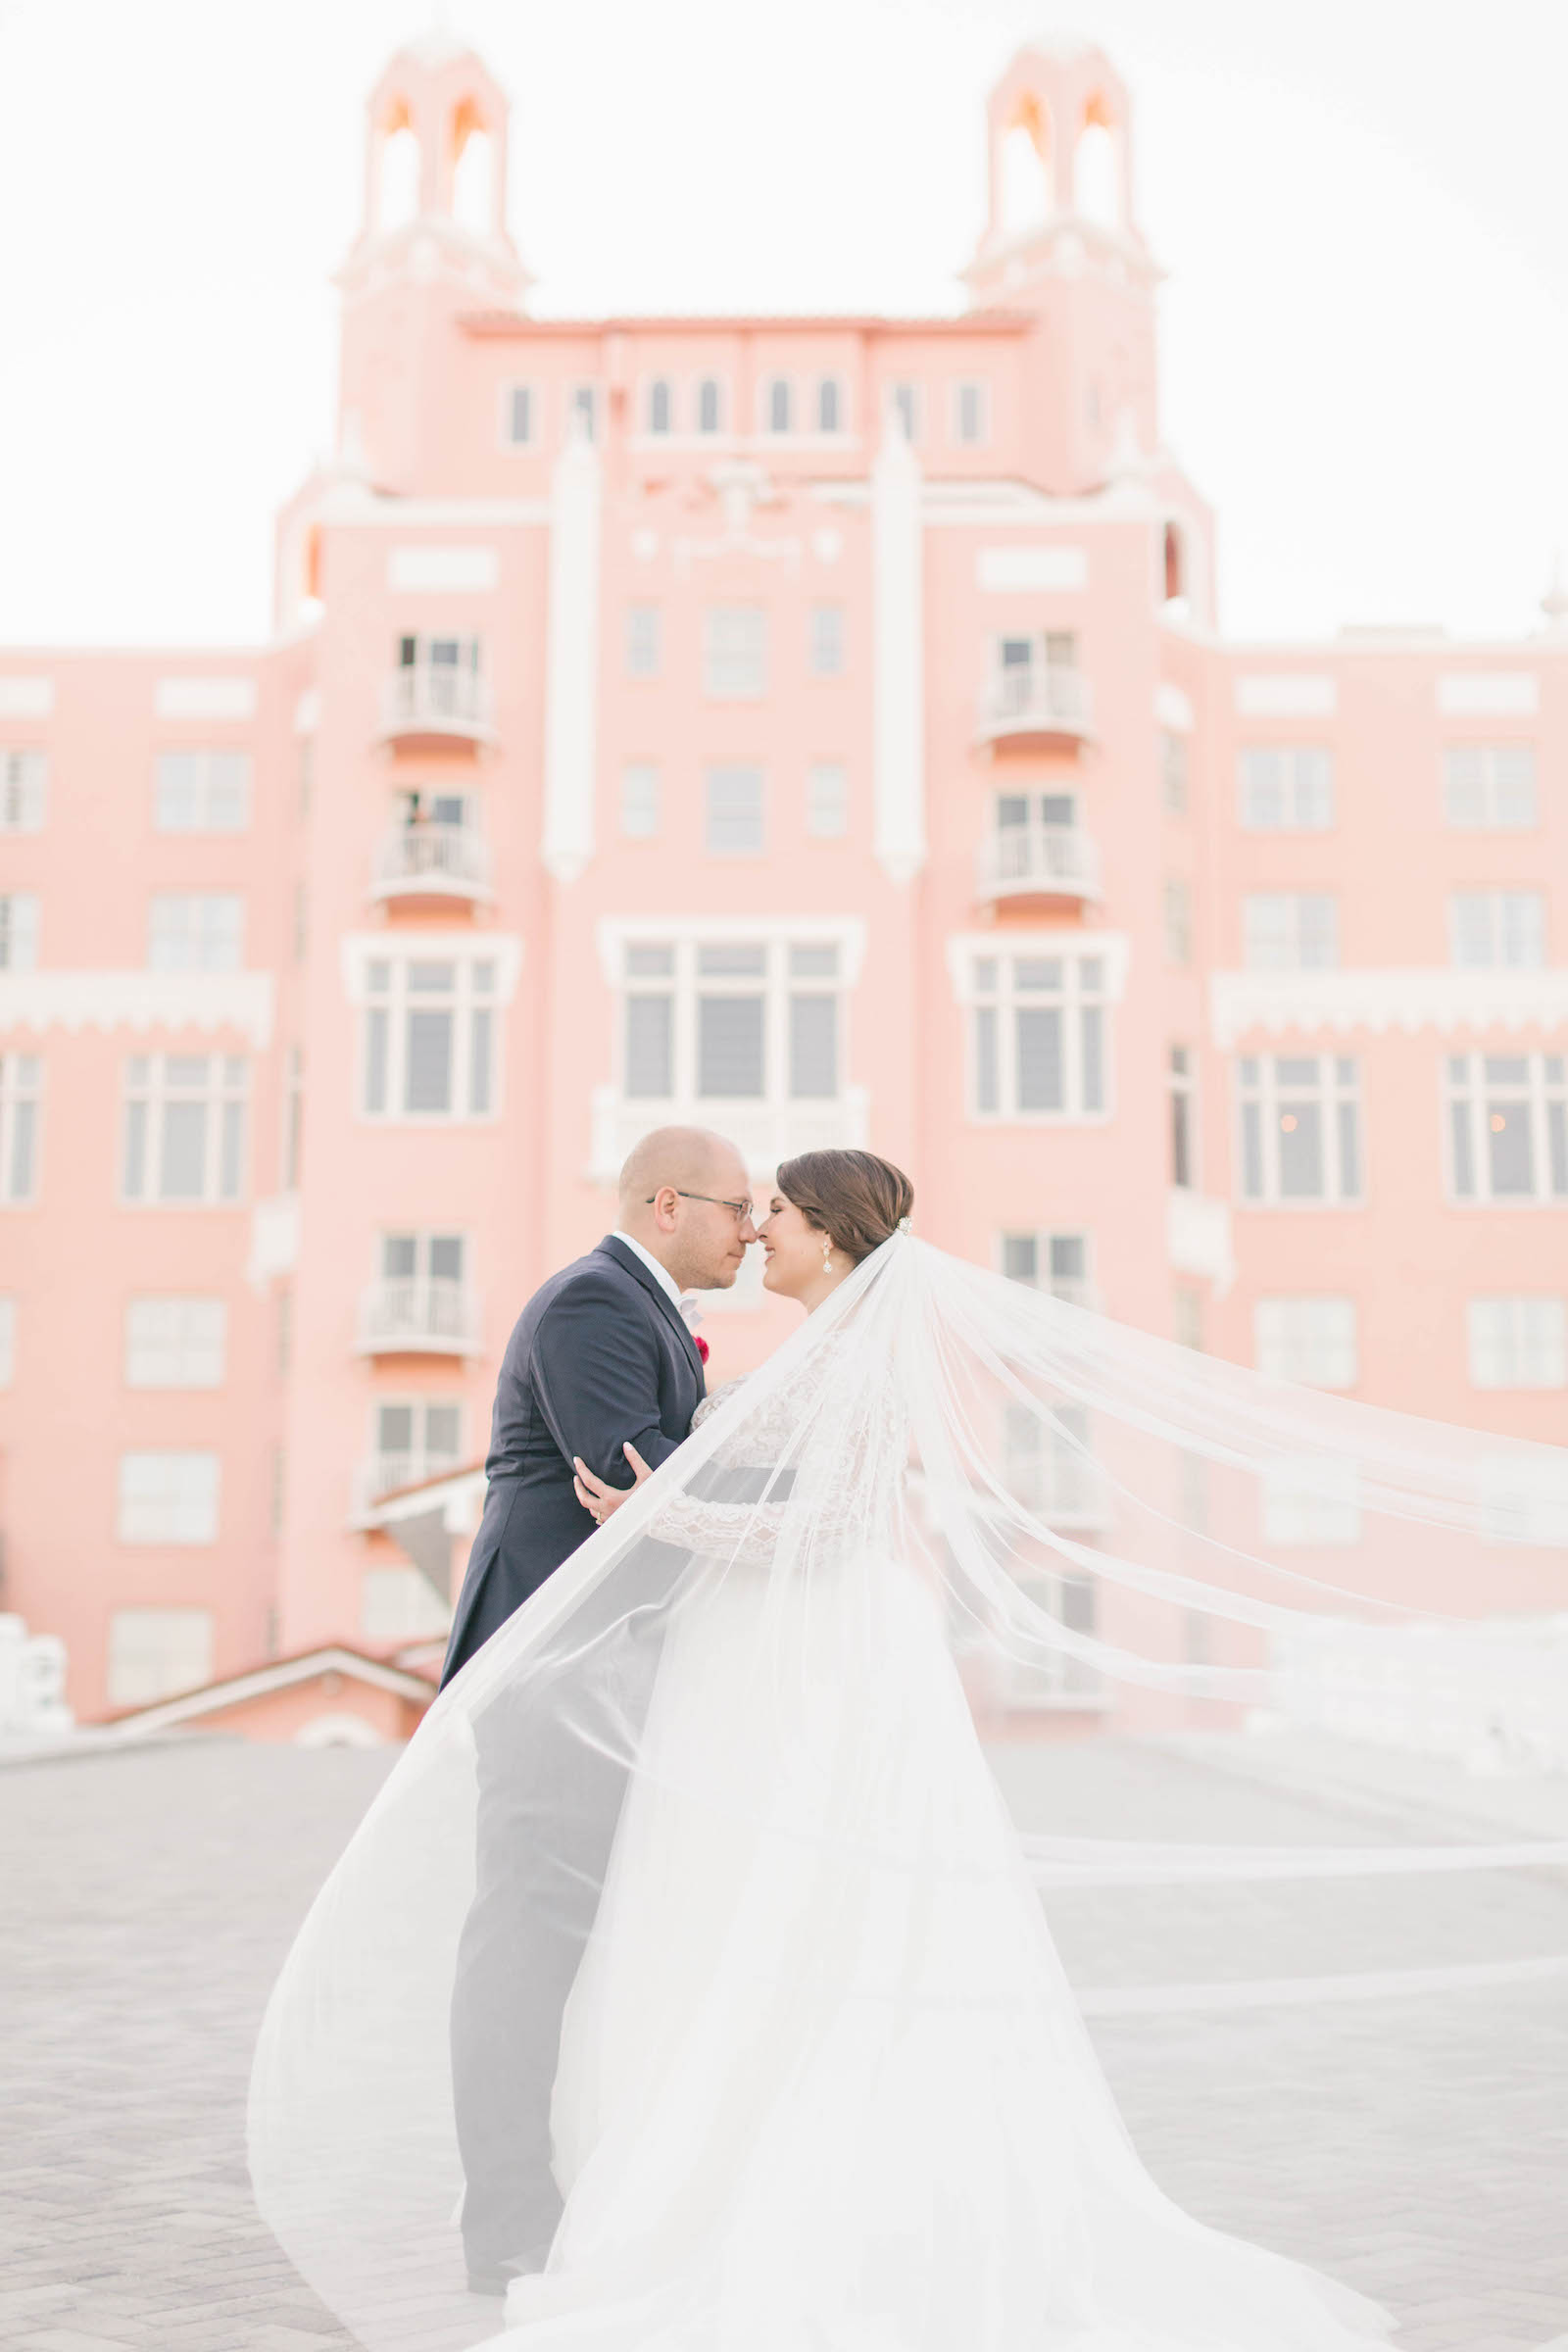 Florida Bride and Groom Veil Wedding Photo in Front of The Pink Palace | Historic St. Pete Waterfront Wedding Venue The Don Cesar